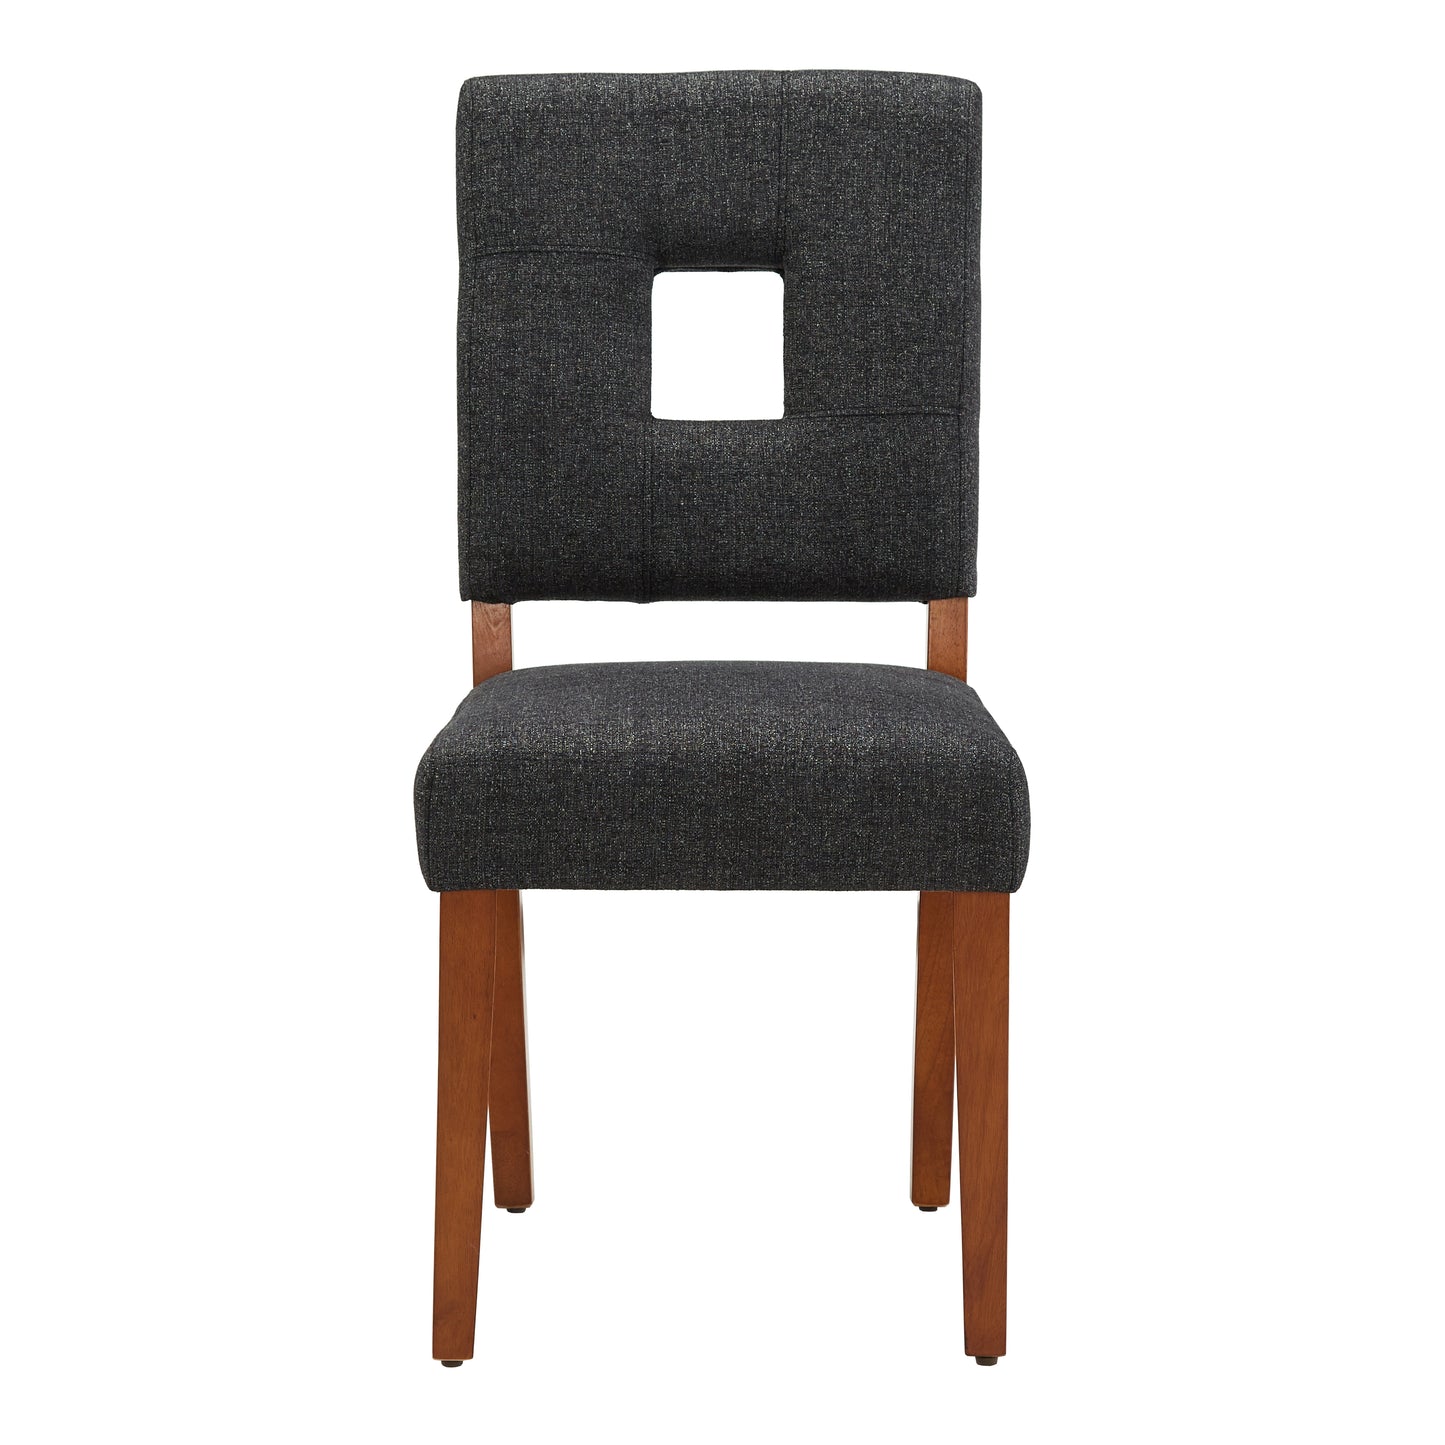 Upholstered Fabric Keyhole Dining Chairs (Set of 2) - Balck